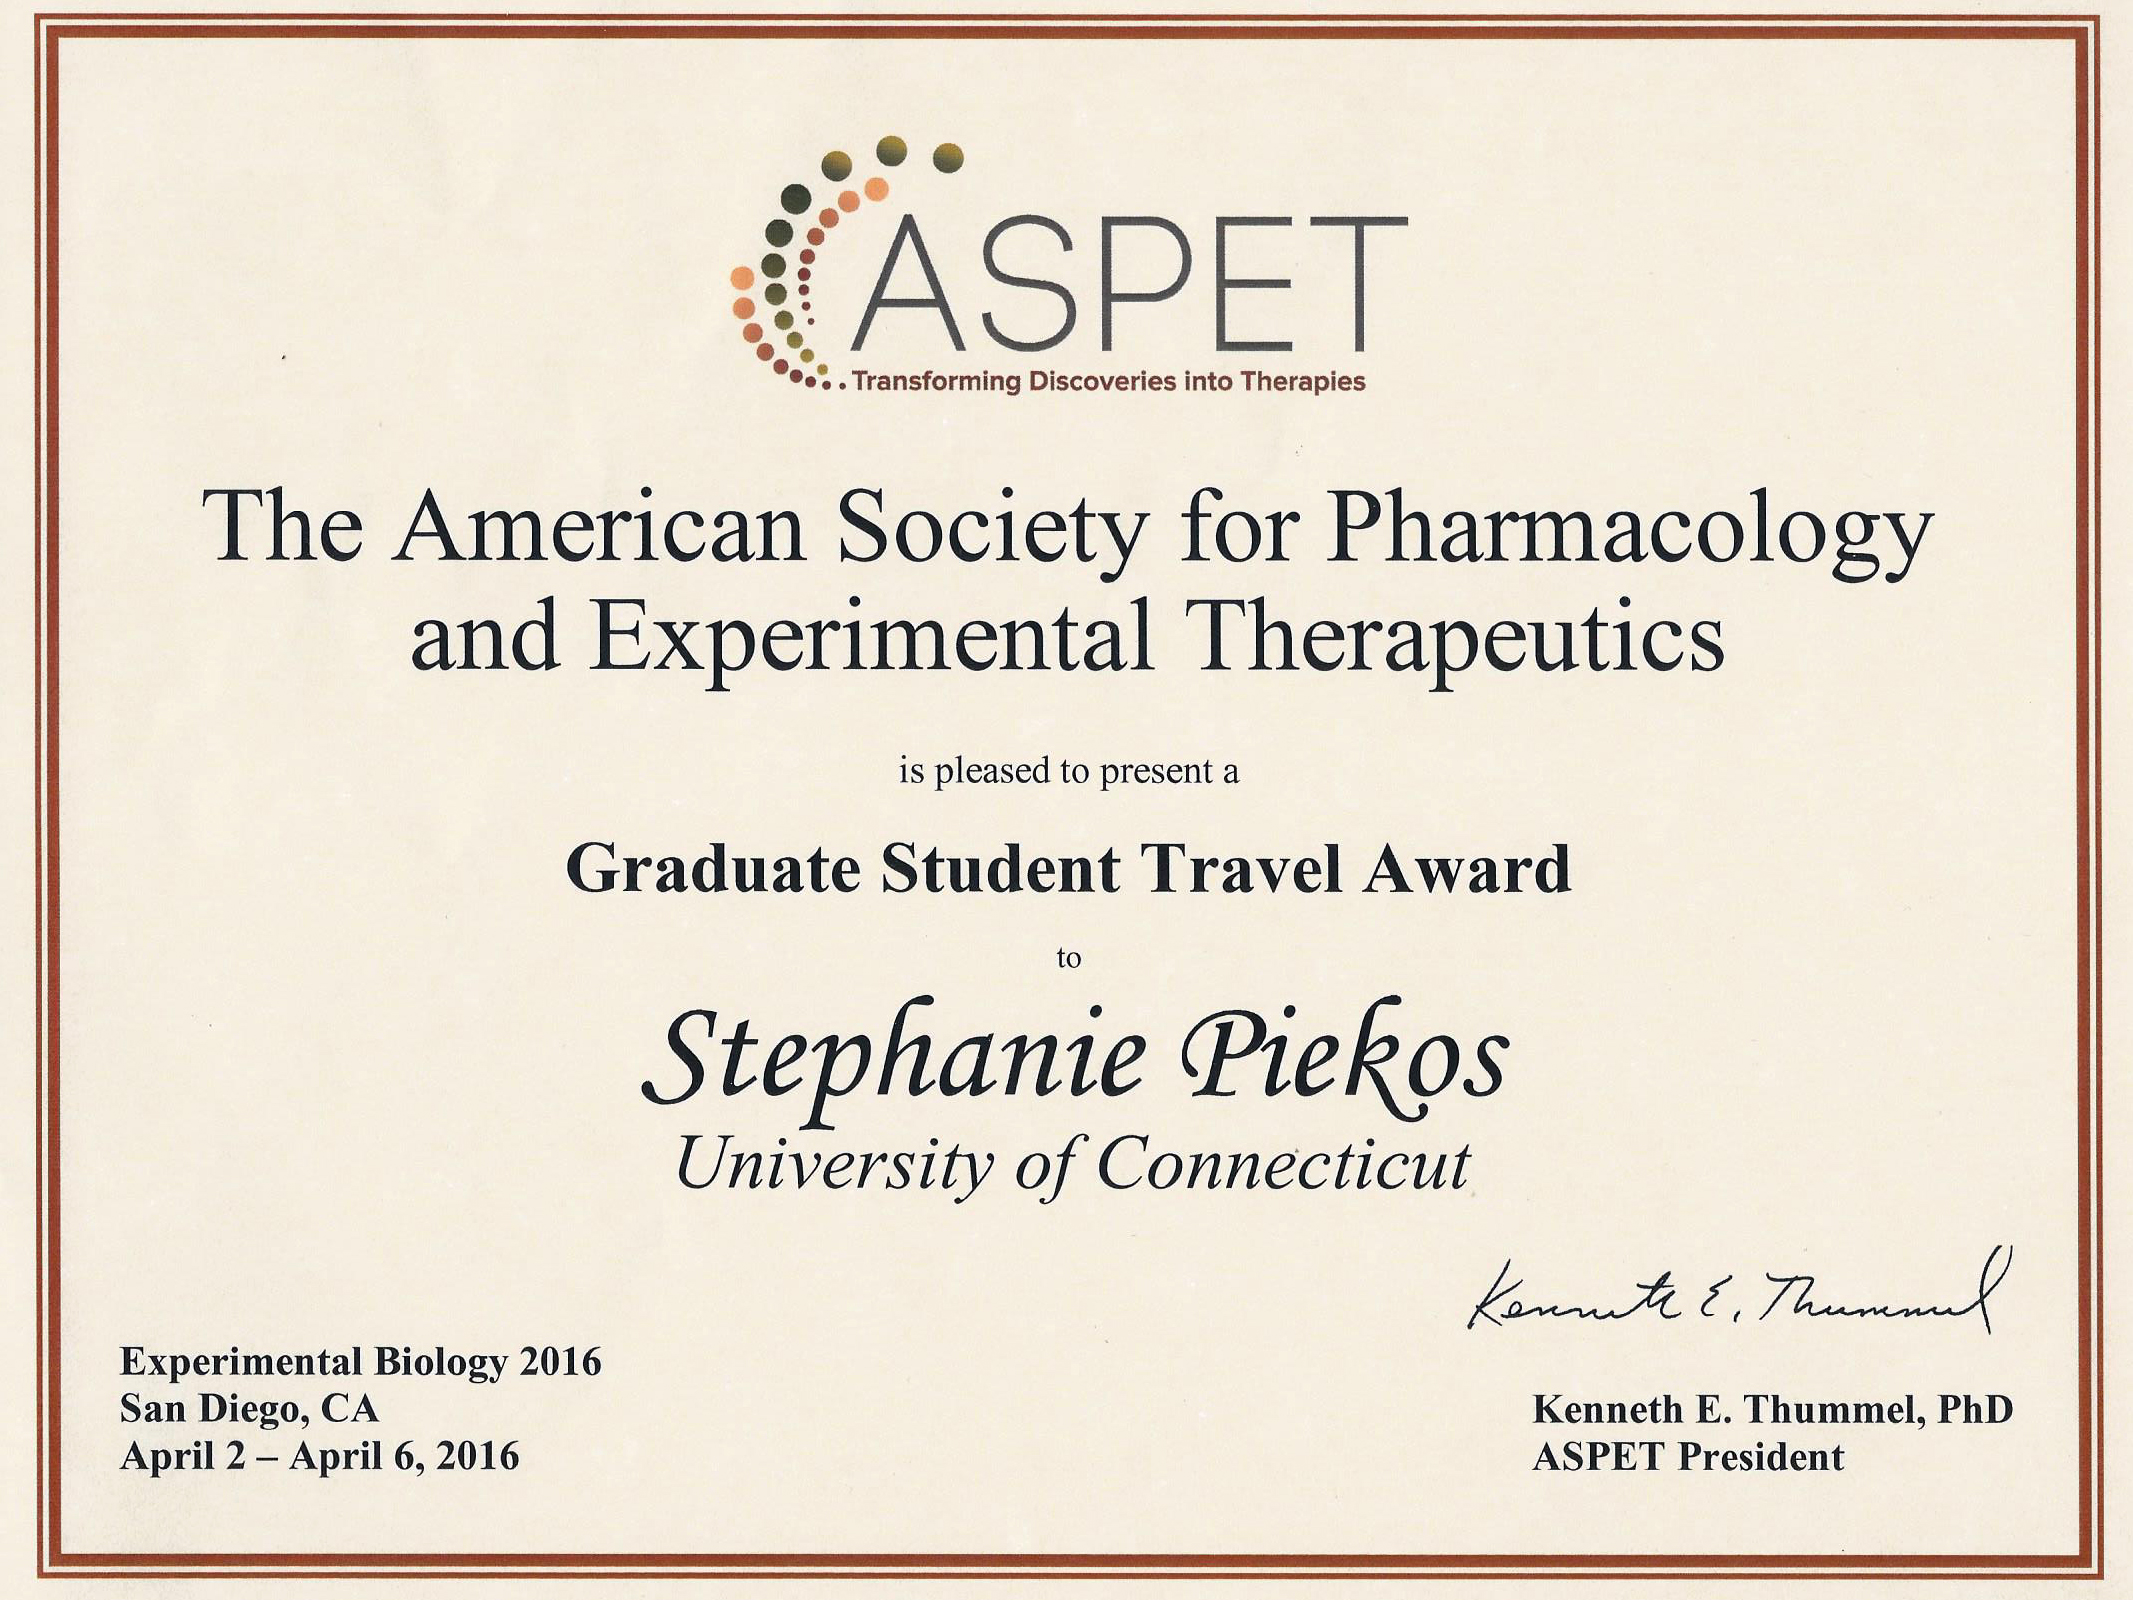  Dr. Yun-Chen Tien received 1st Plase of Postdoctoral Scientist Best Abstract Award issued by the Division for Drug Metabolism of ASPET in 2015 Experimental Biology Meeting in Boston in March, 2015.